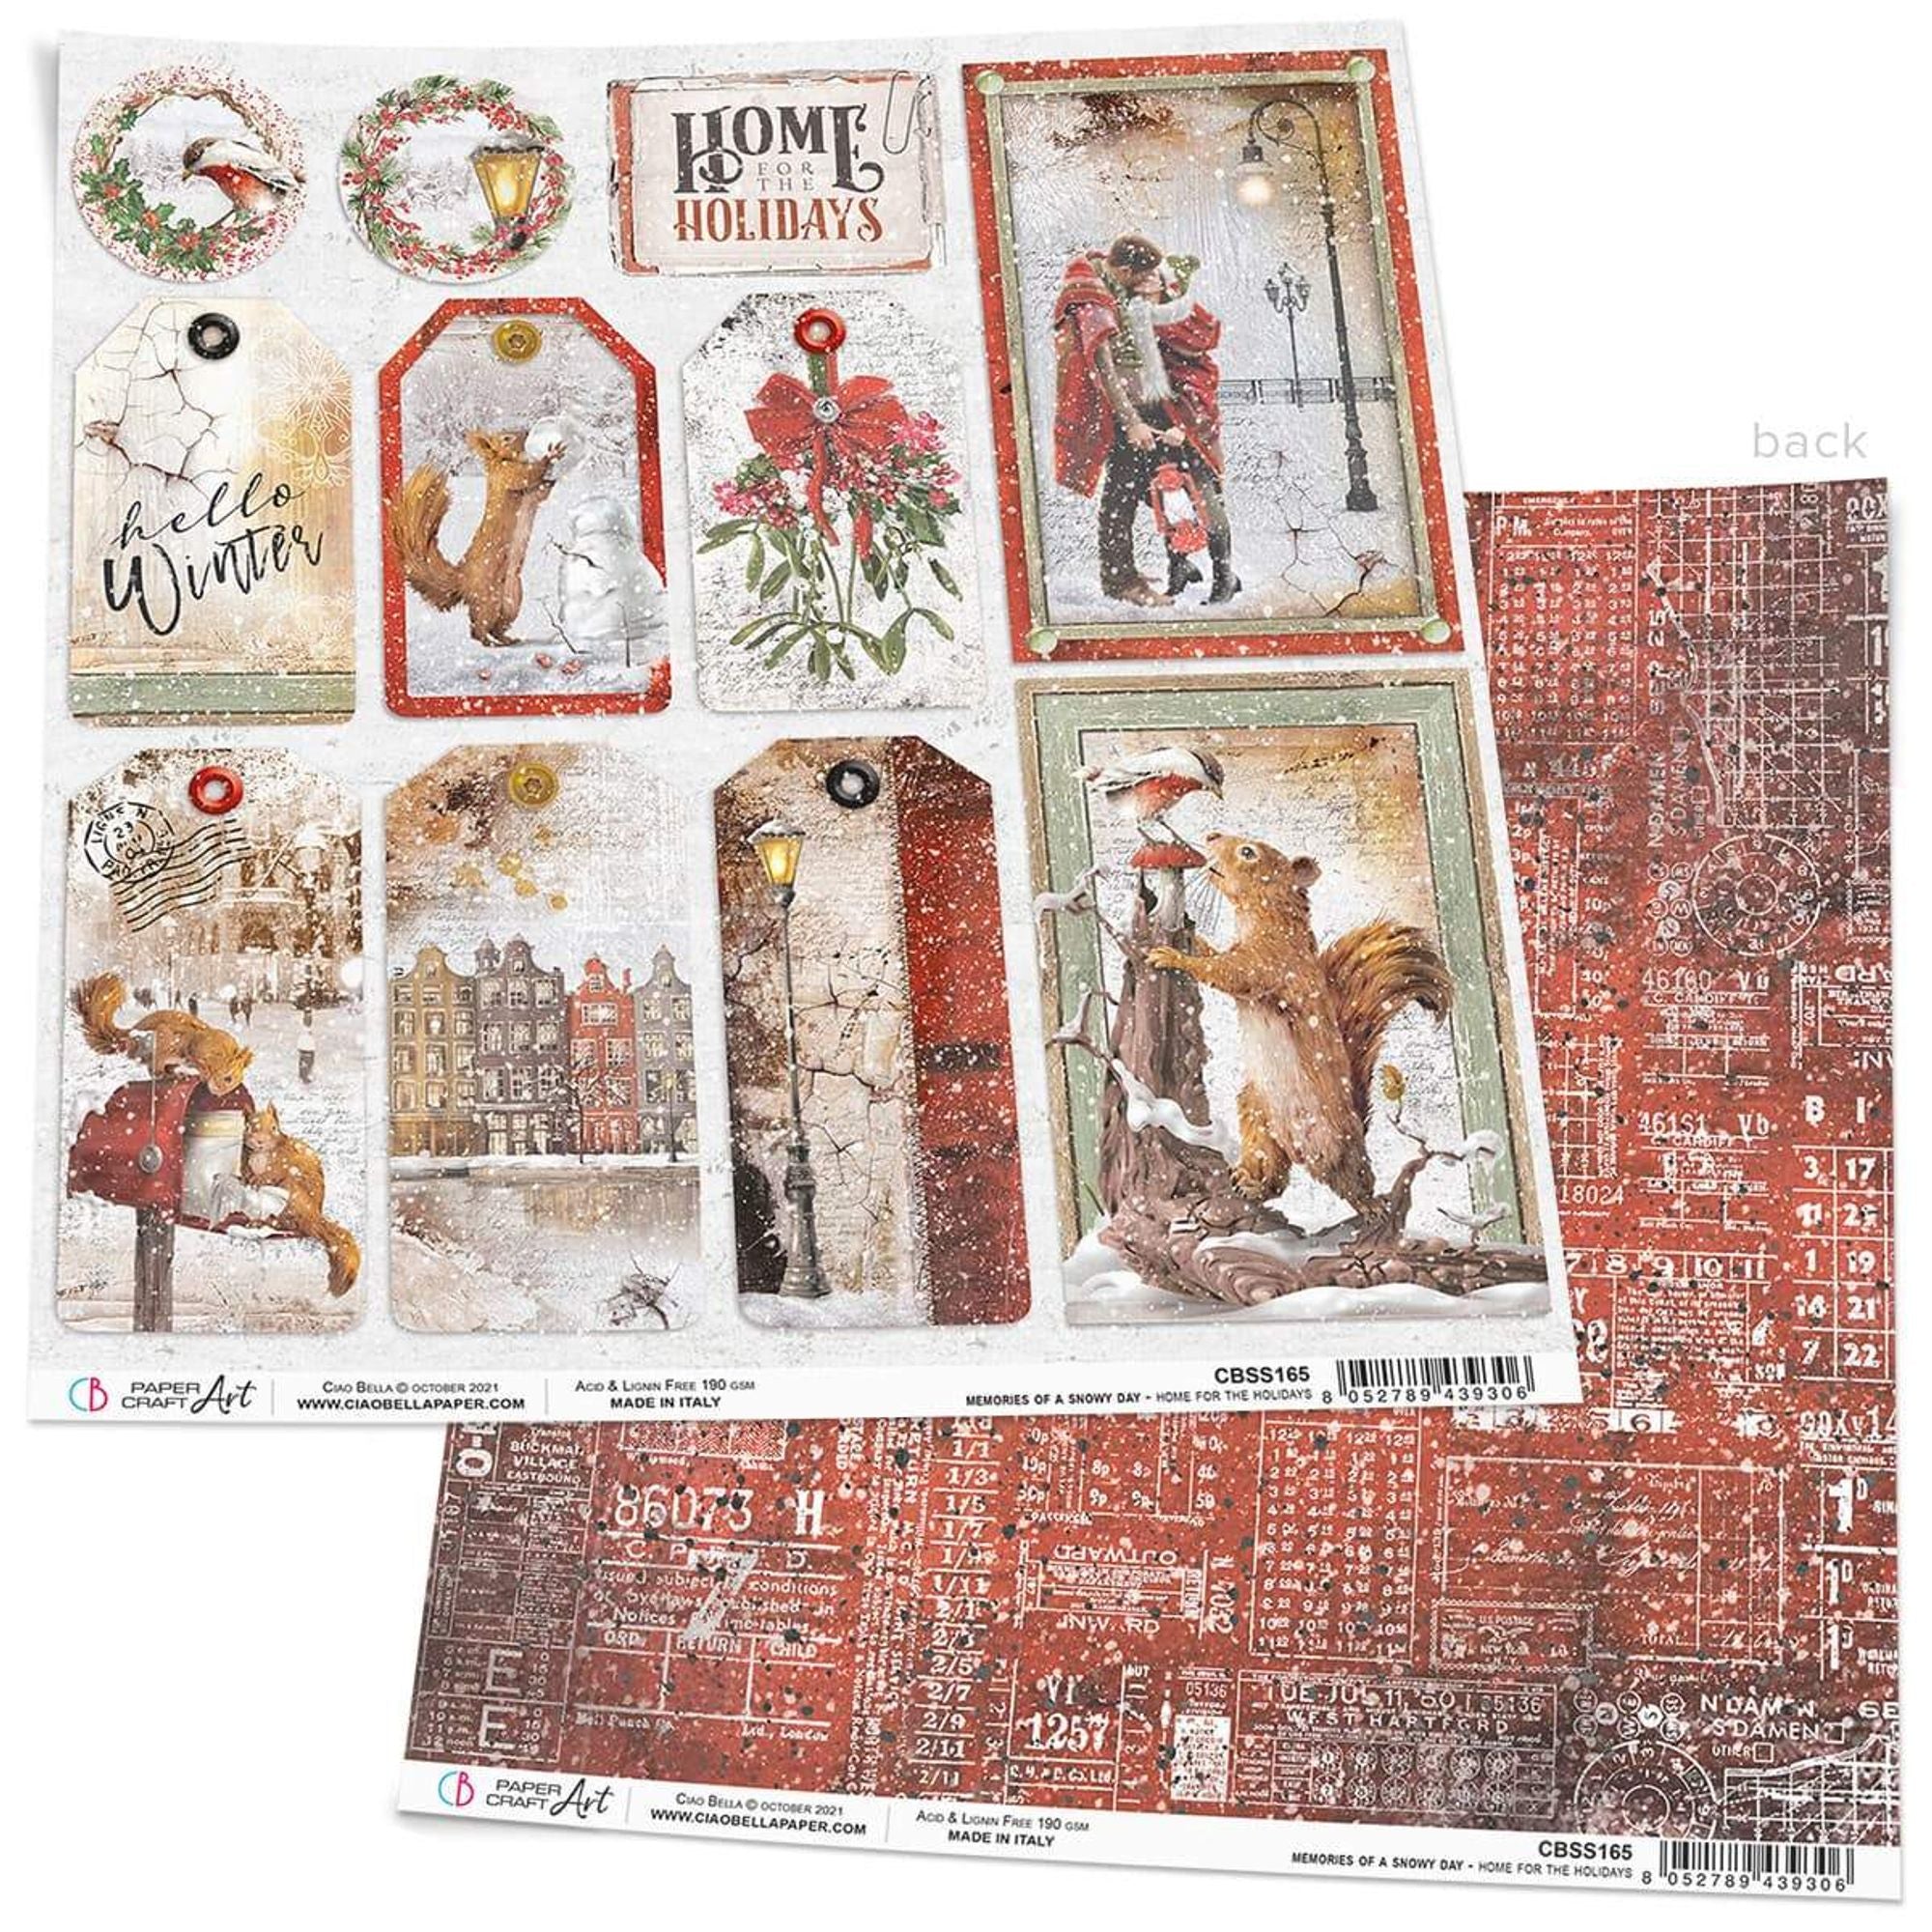 Ciao Bella Home for the Holidays Paper Sheet 12"x12" 1 Sheet